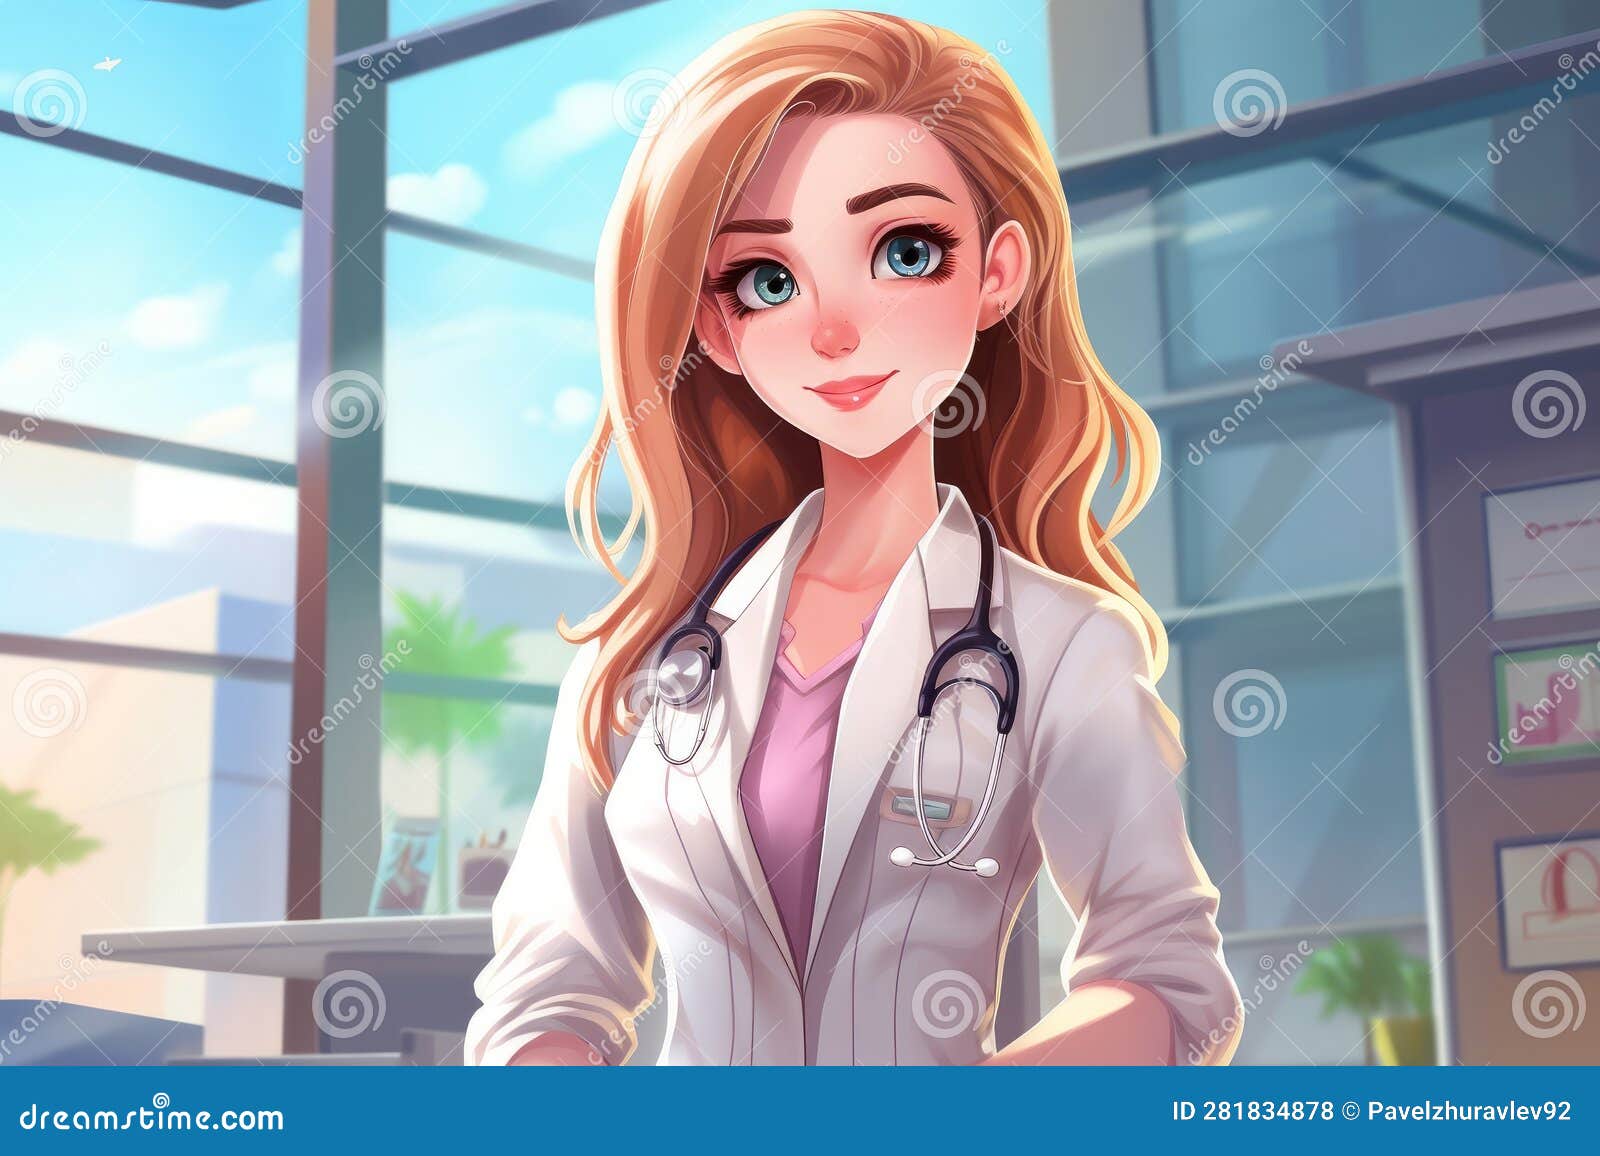 Anime Doctor Wallpapers - Top Free Anime Doctor Backgrounds -  WallpaperAccess